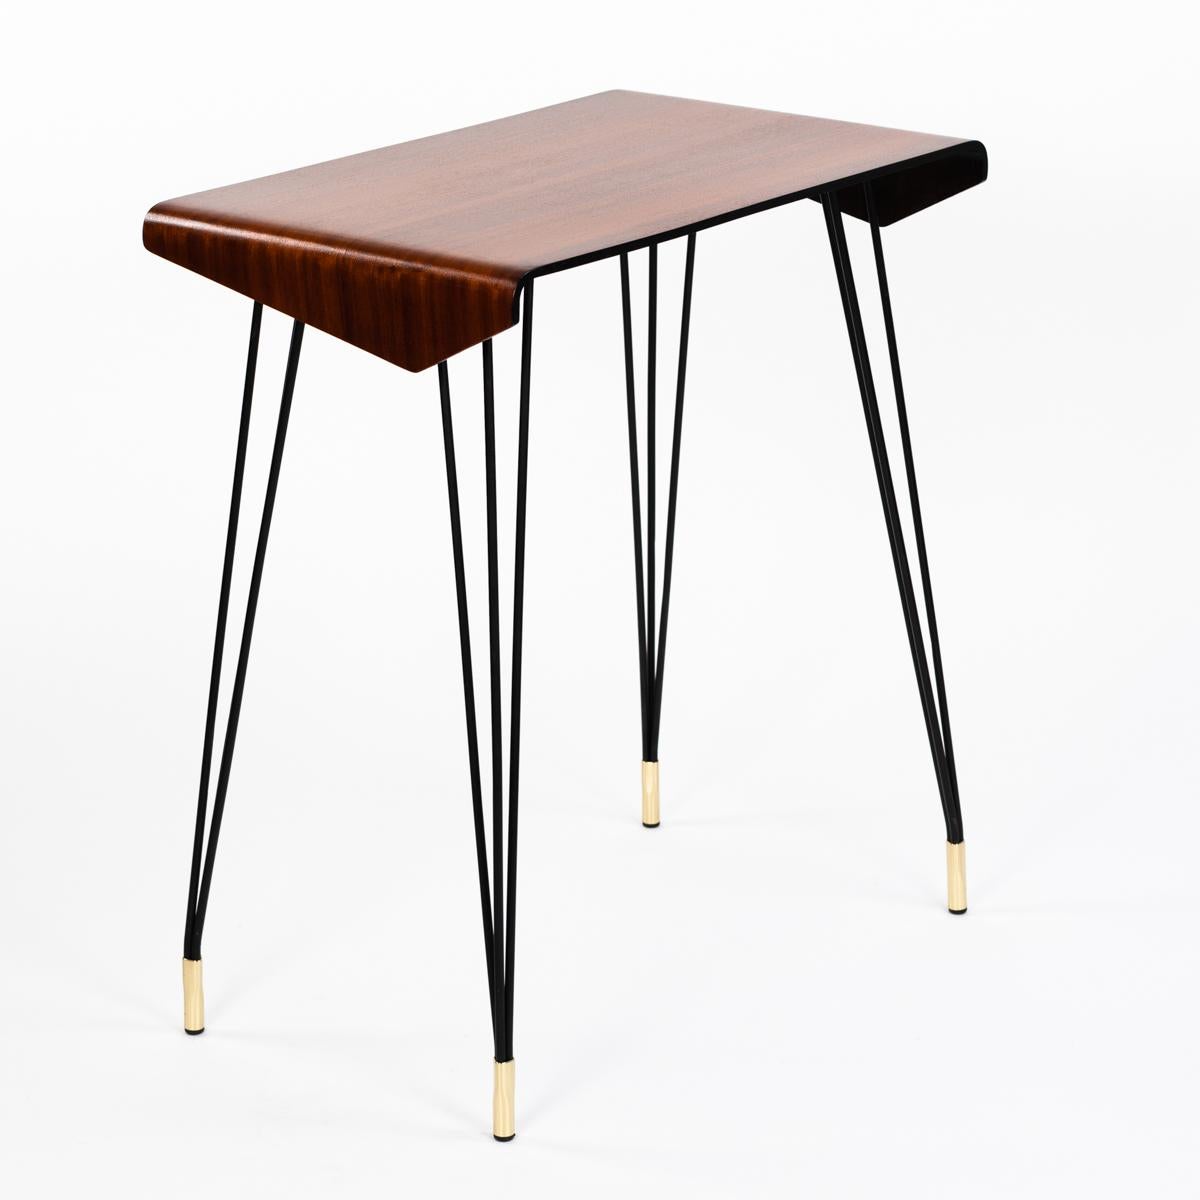 Small Italian Mid-Century desk, console table or side table.
The object is extremely light-footed and also a little eccentric.
The bentwood top of mahogany is beautifully grained and has a warm, homely wood tone. 
The edge is stained black. The